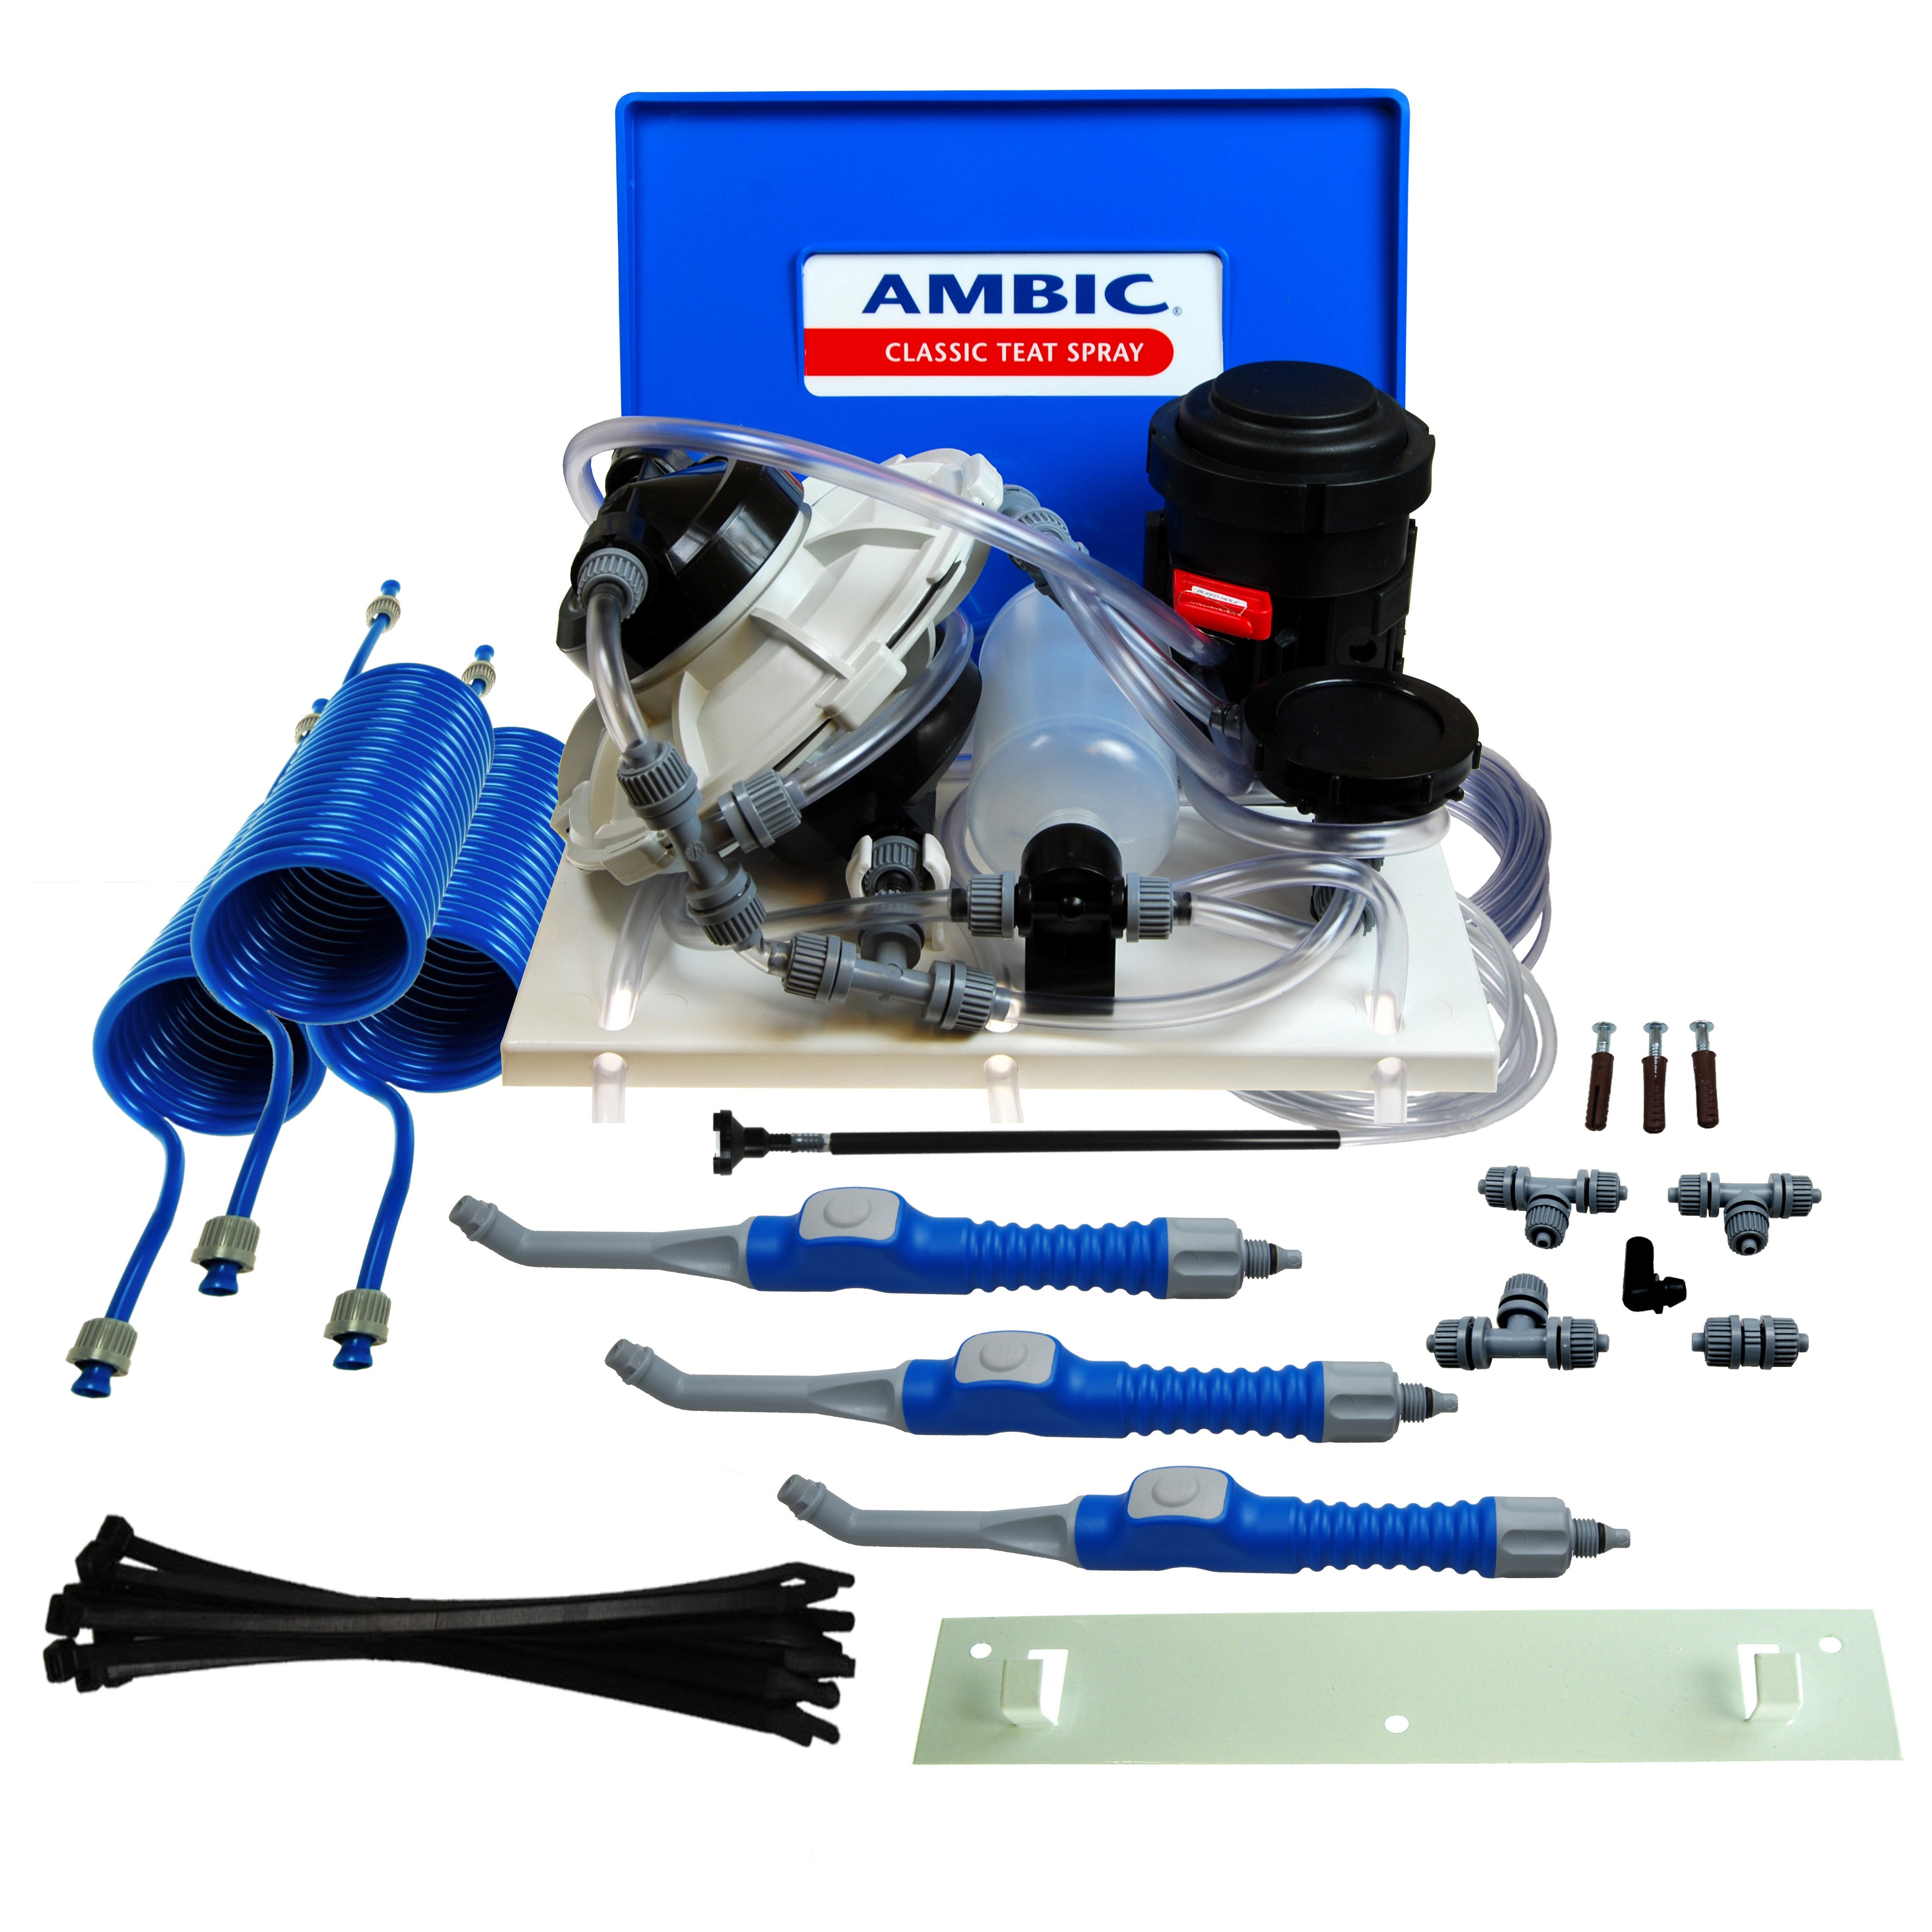 Ambic Classic Teat Spray System Complete - Button Guns